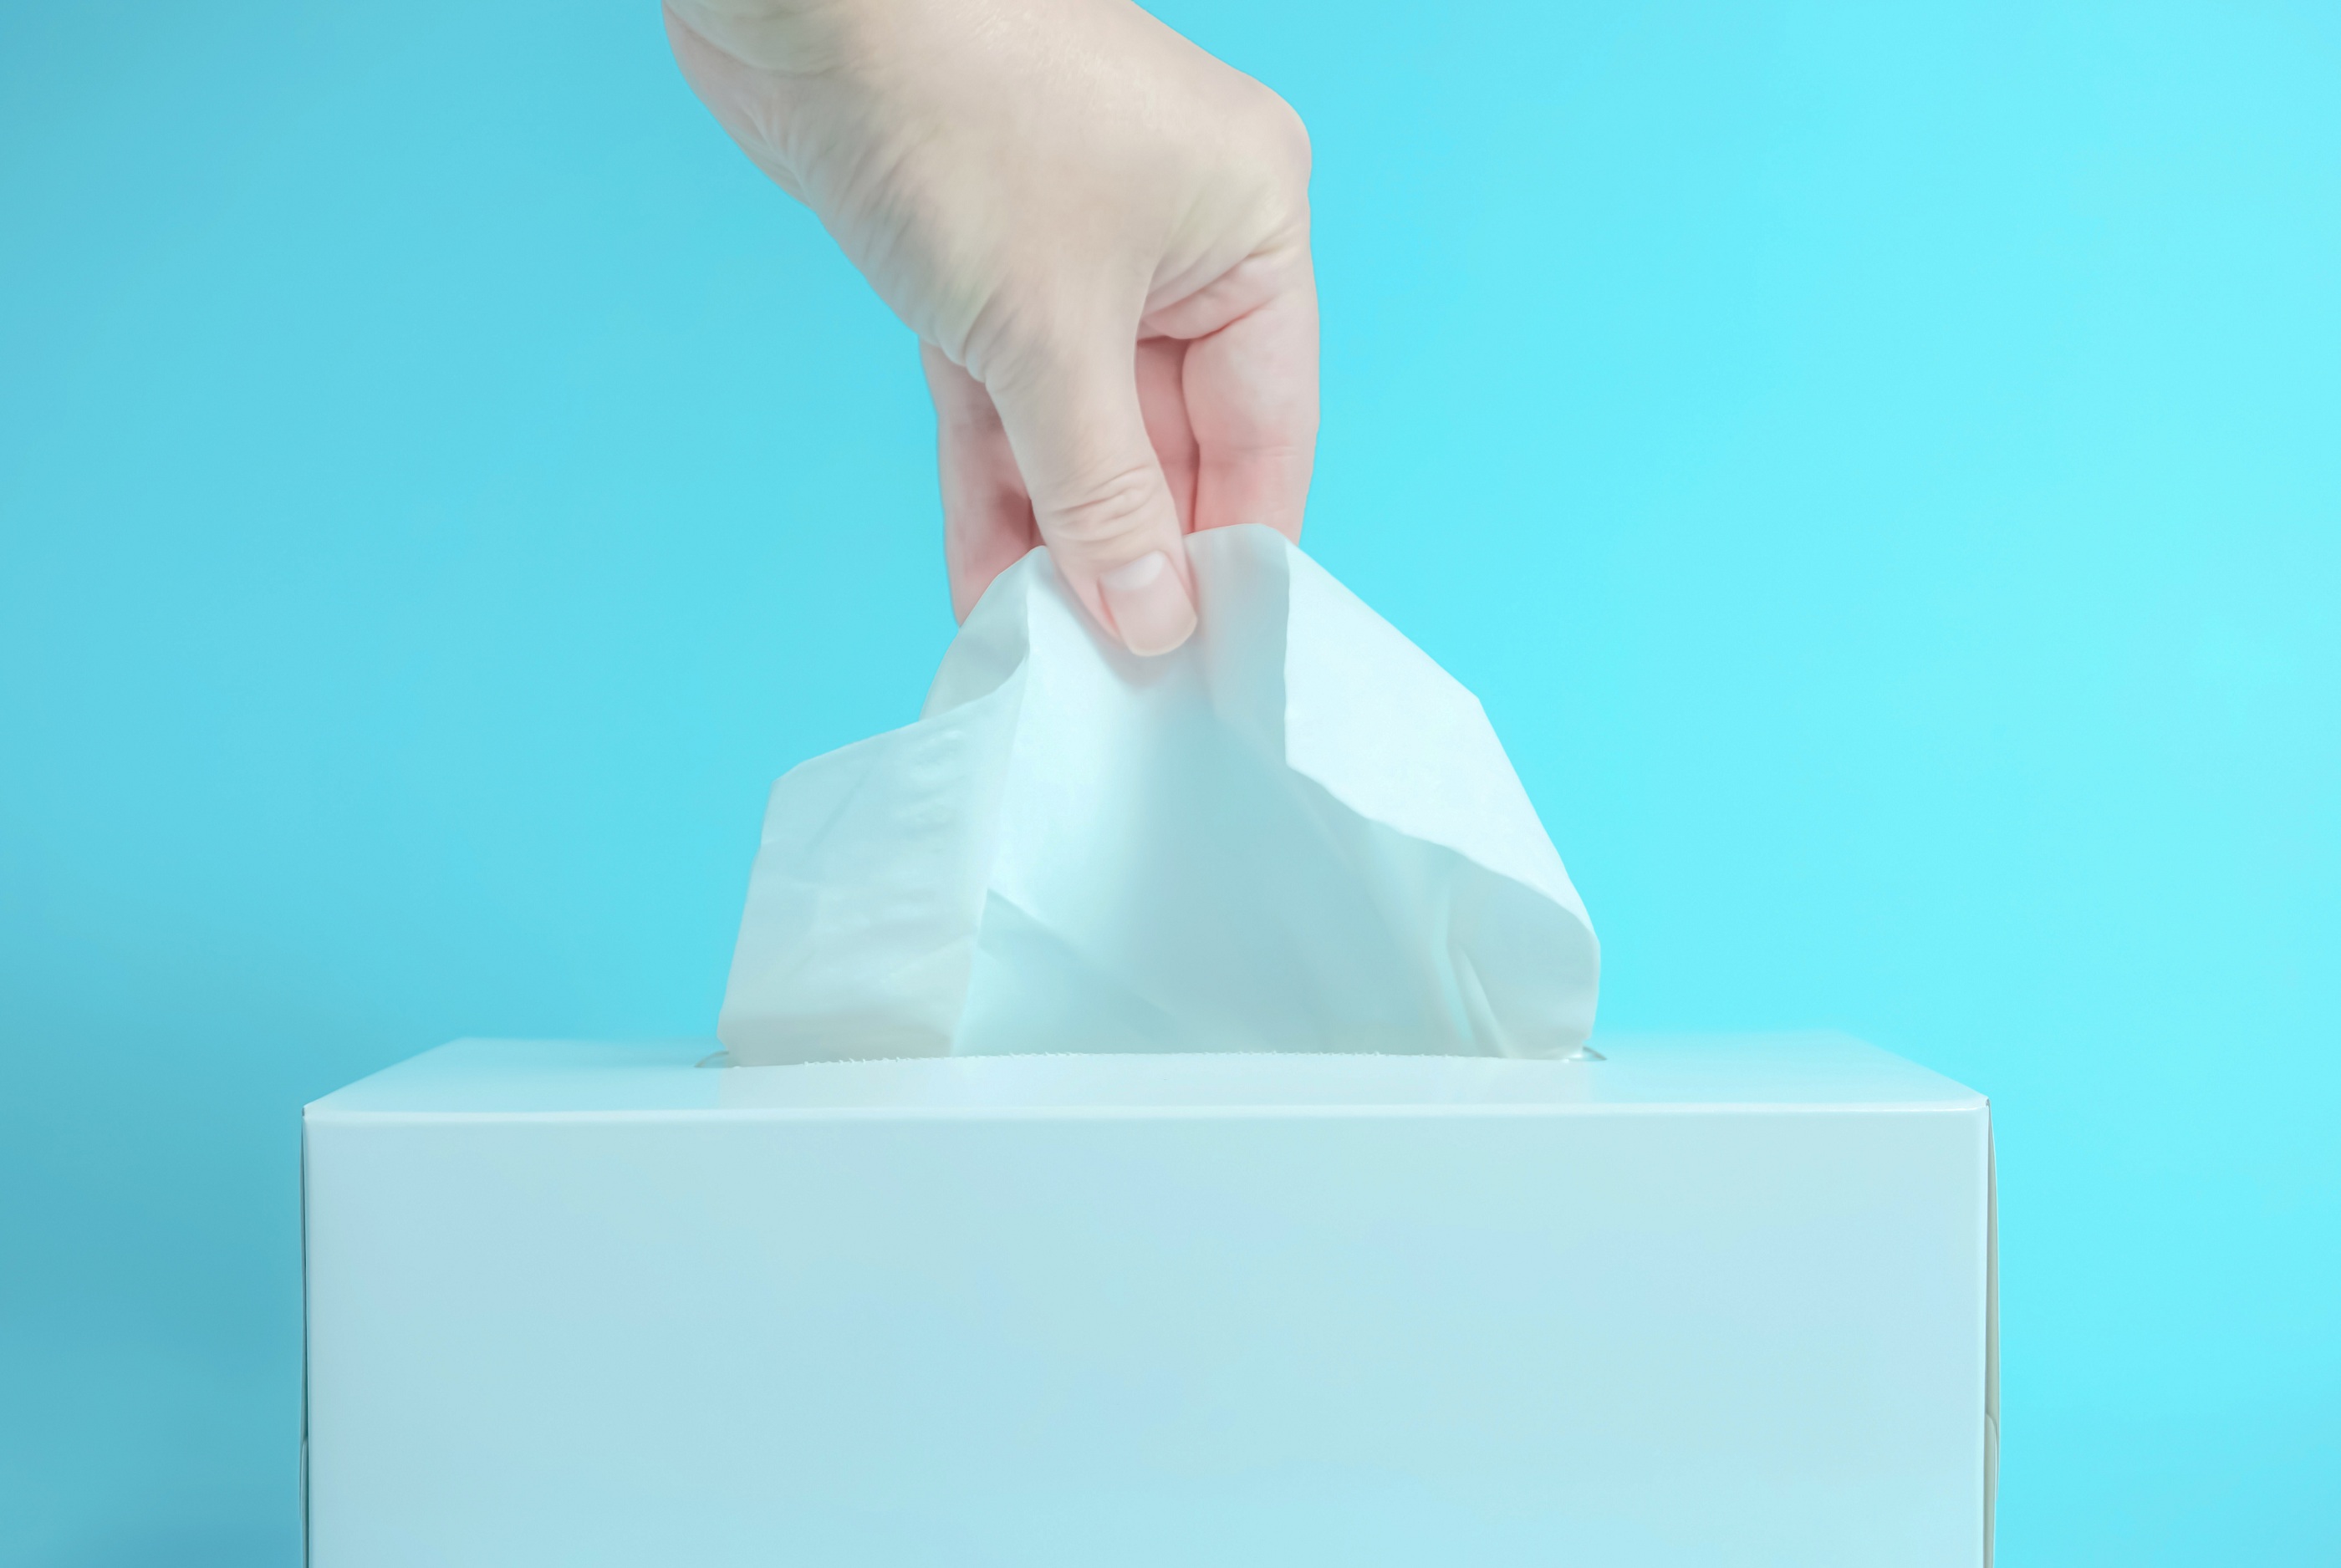 Why do tissues in cubed boxes cost more than tissues in horizontal boxes? -  Marketplace